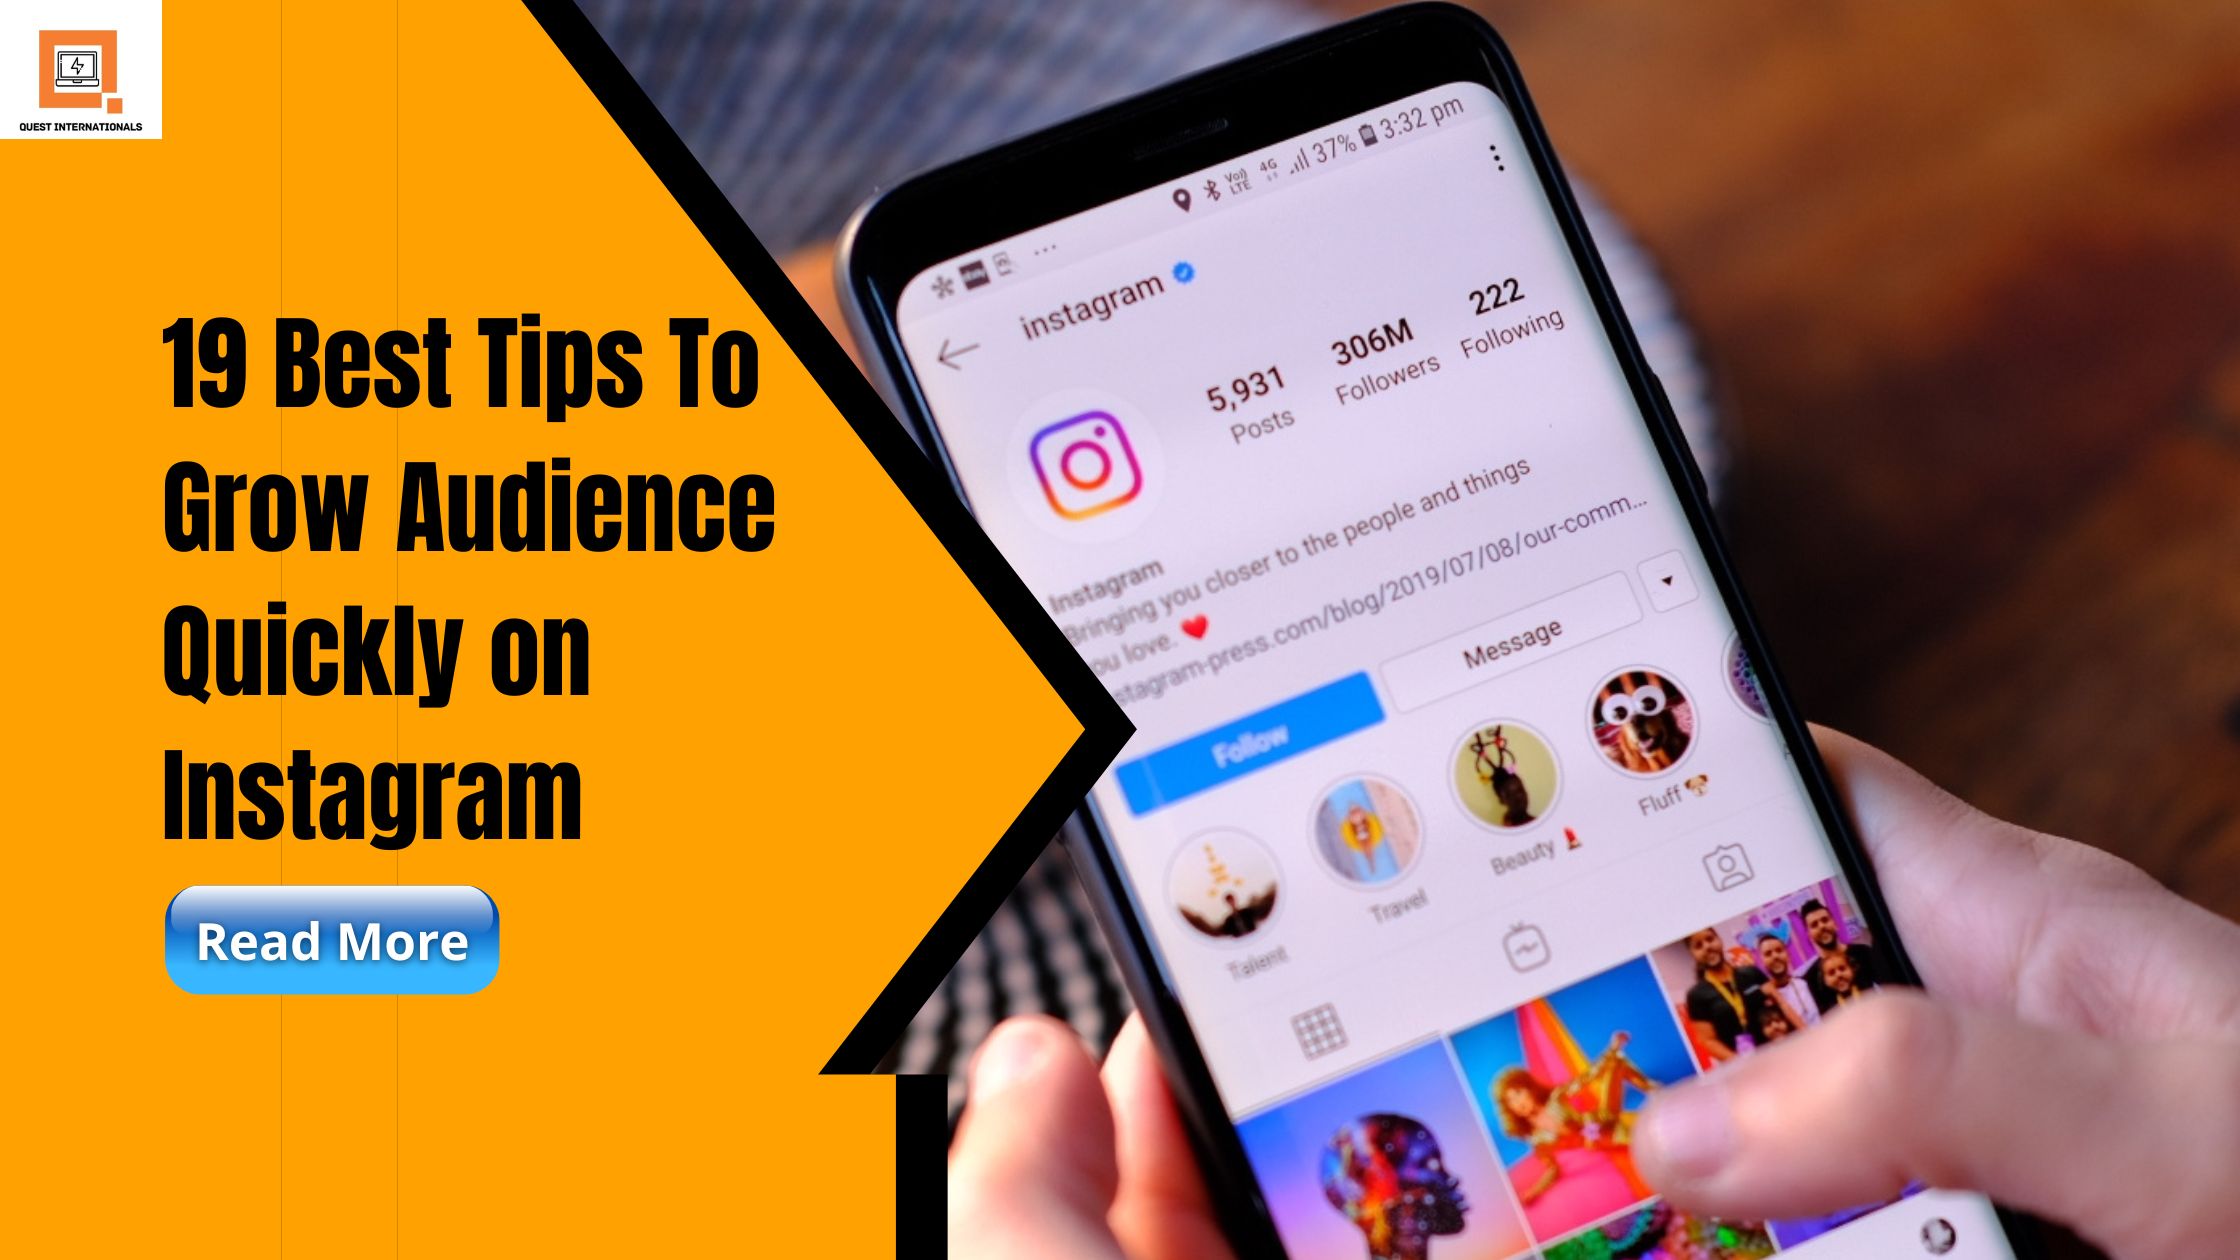 You are currently viewing 19 Best Tips To Grow Audience Quickly on Instagram